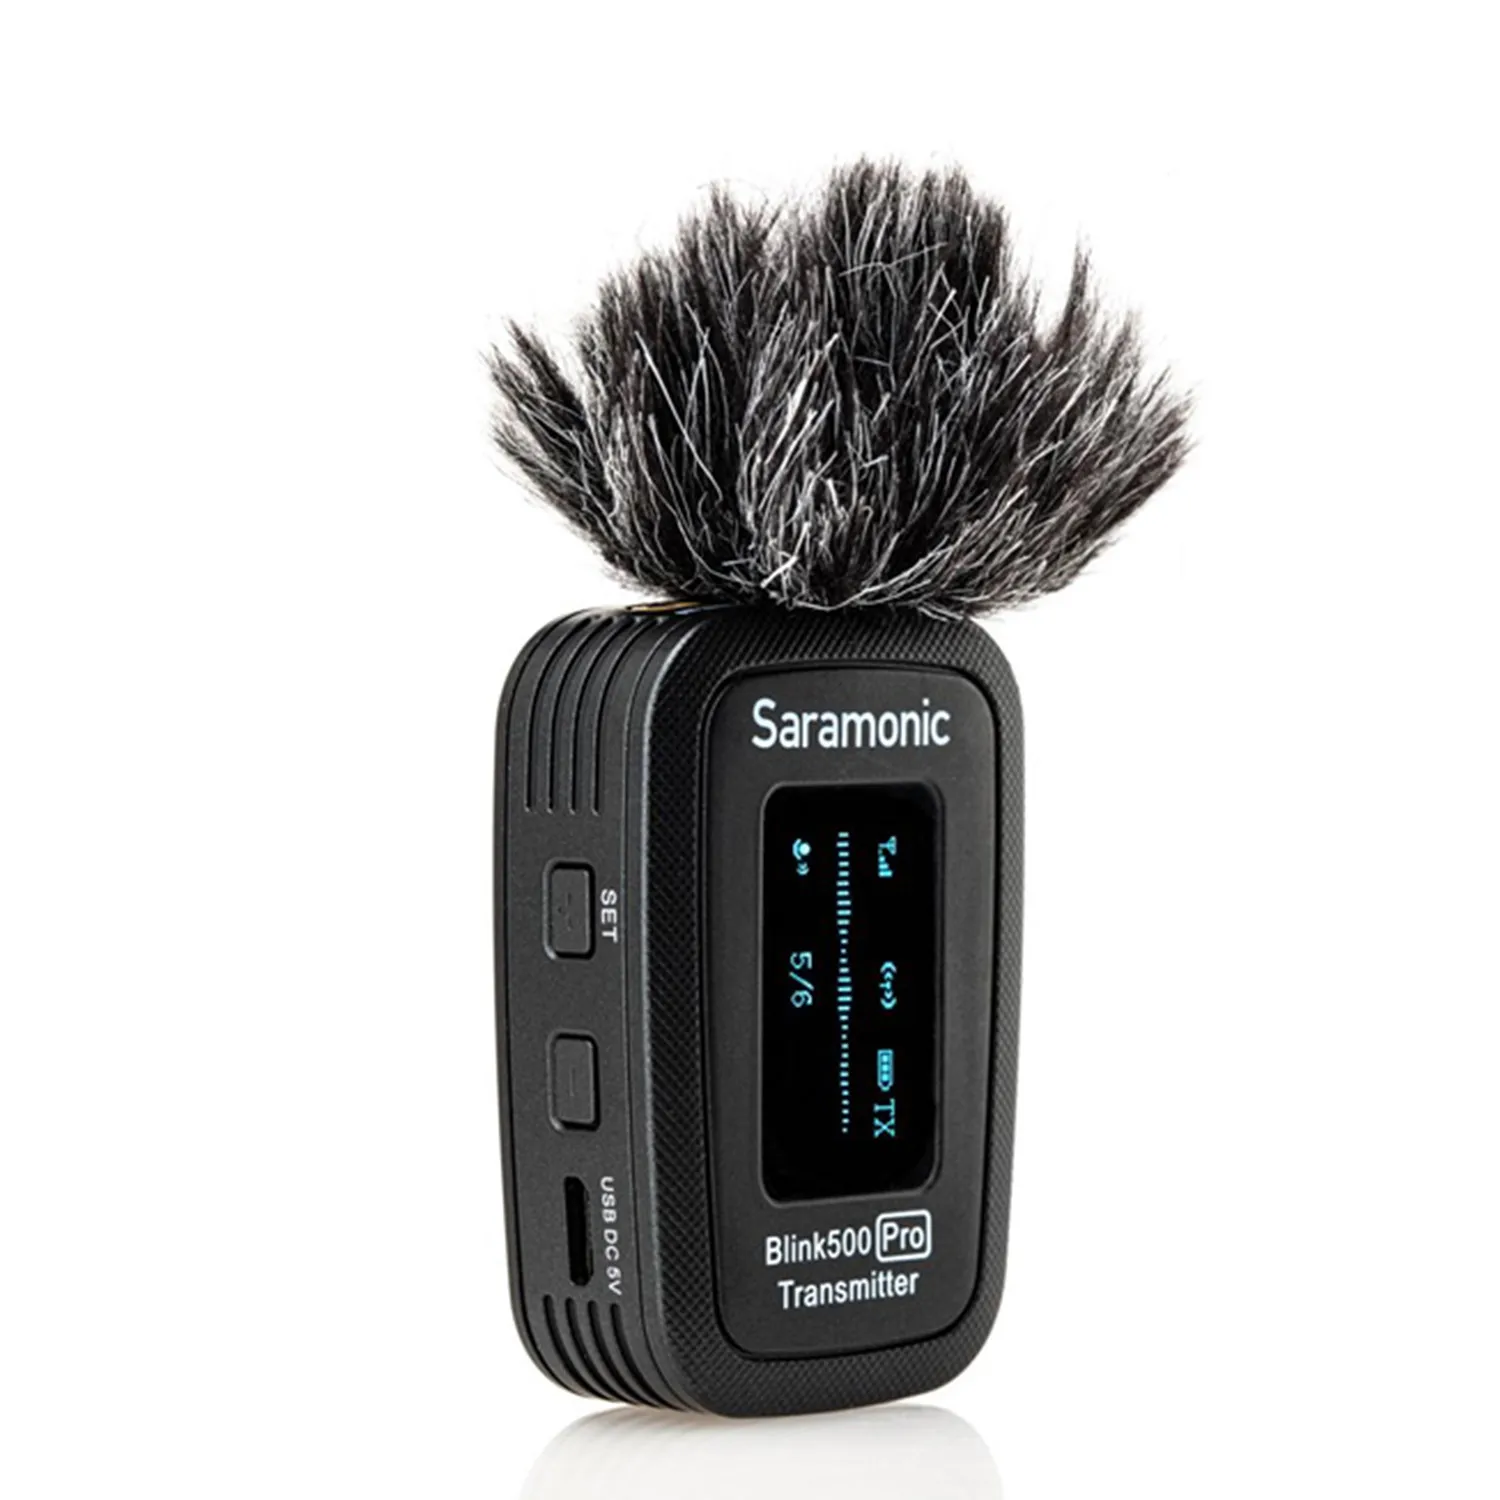 Saramonic Blink500 Pro TX 2.4GHz Wireless Transmitter for Blink500 Pro Receiver built-in Mic and 3.5mm Mic/Line input